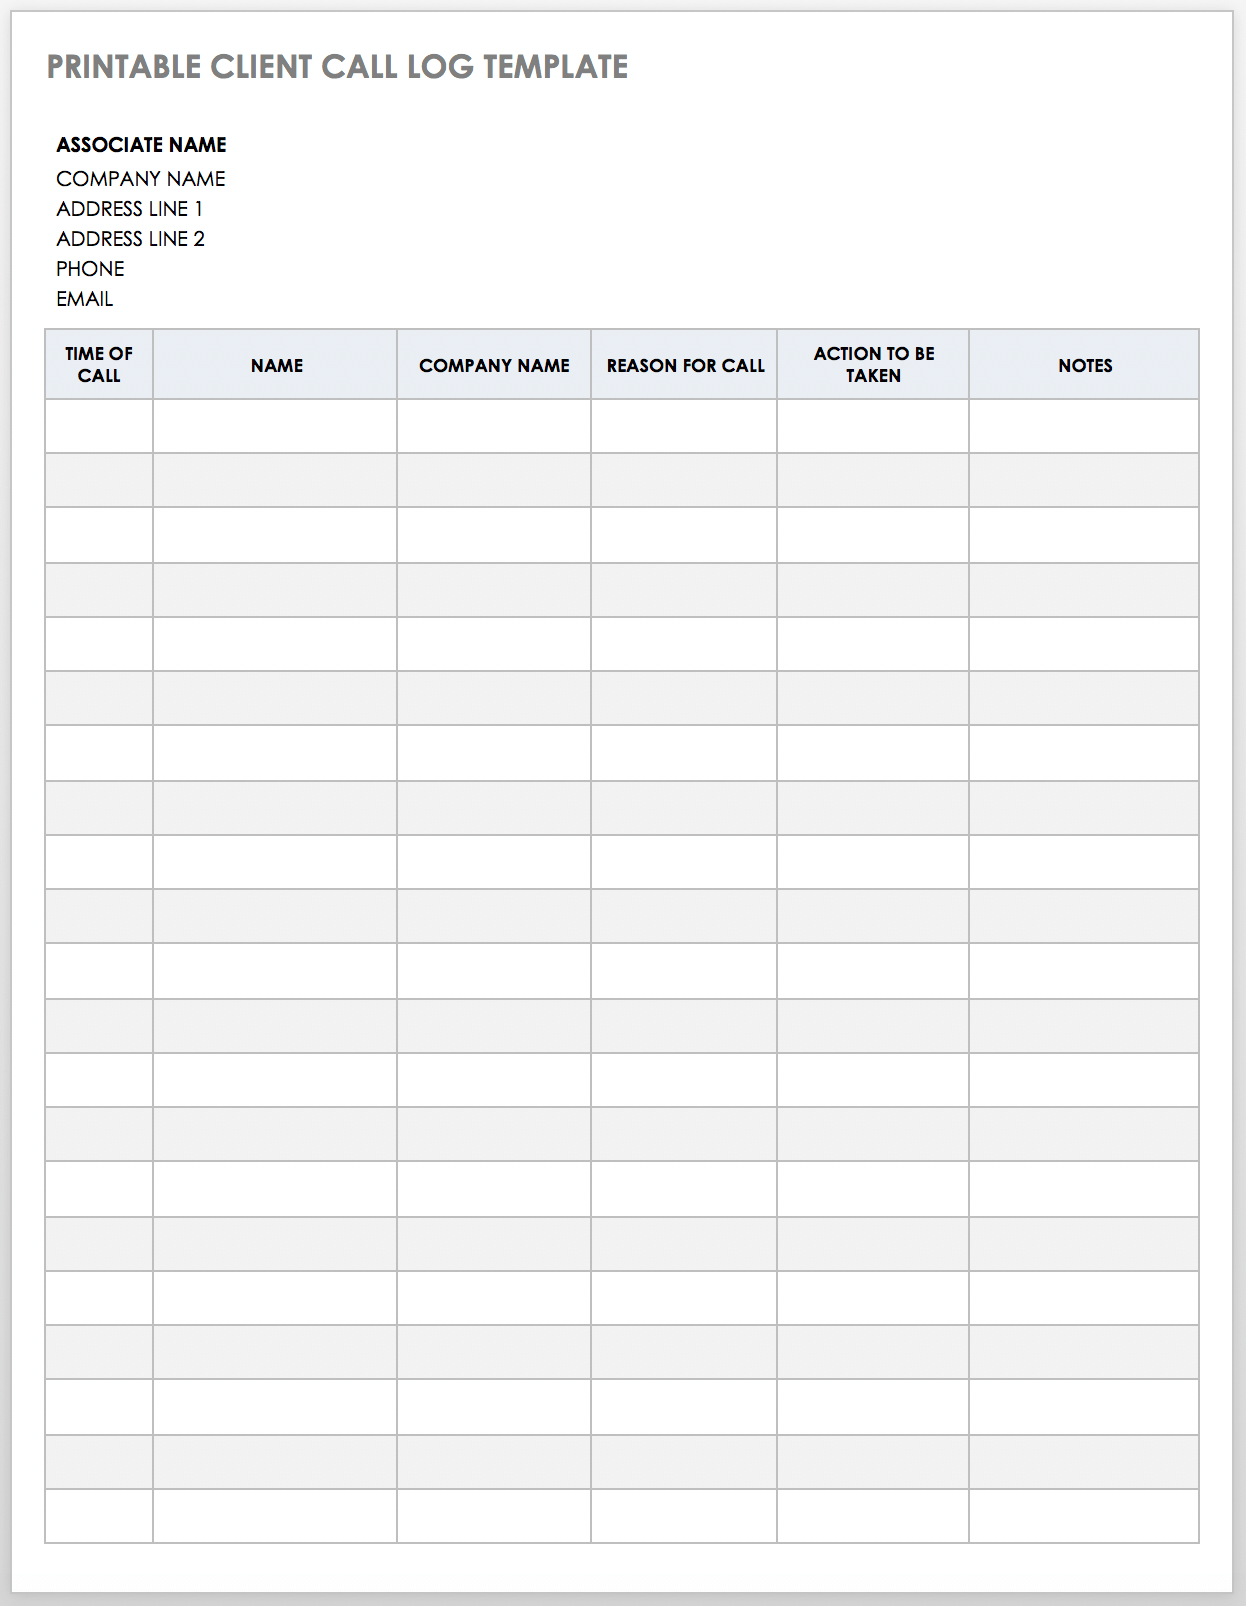 Printable Client Call Log Template